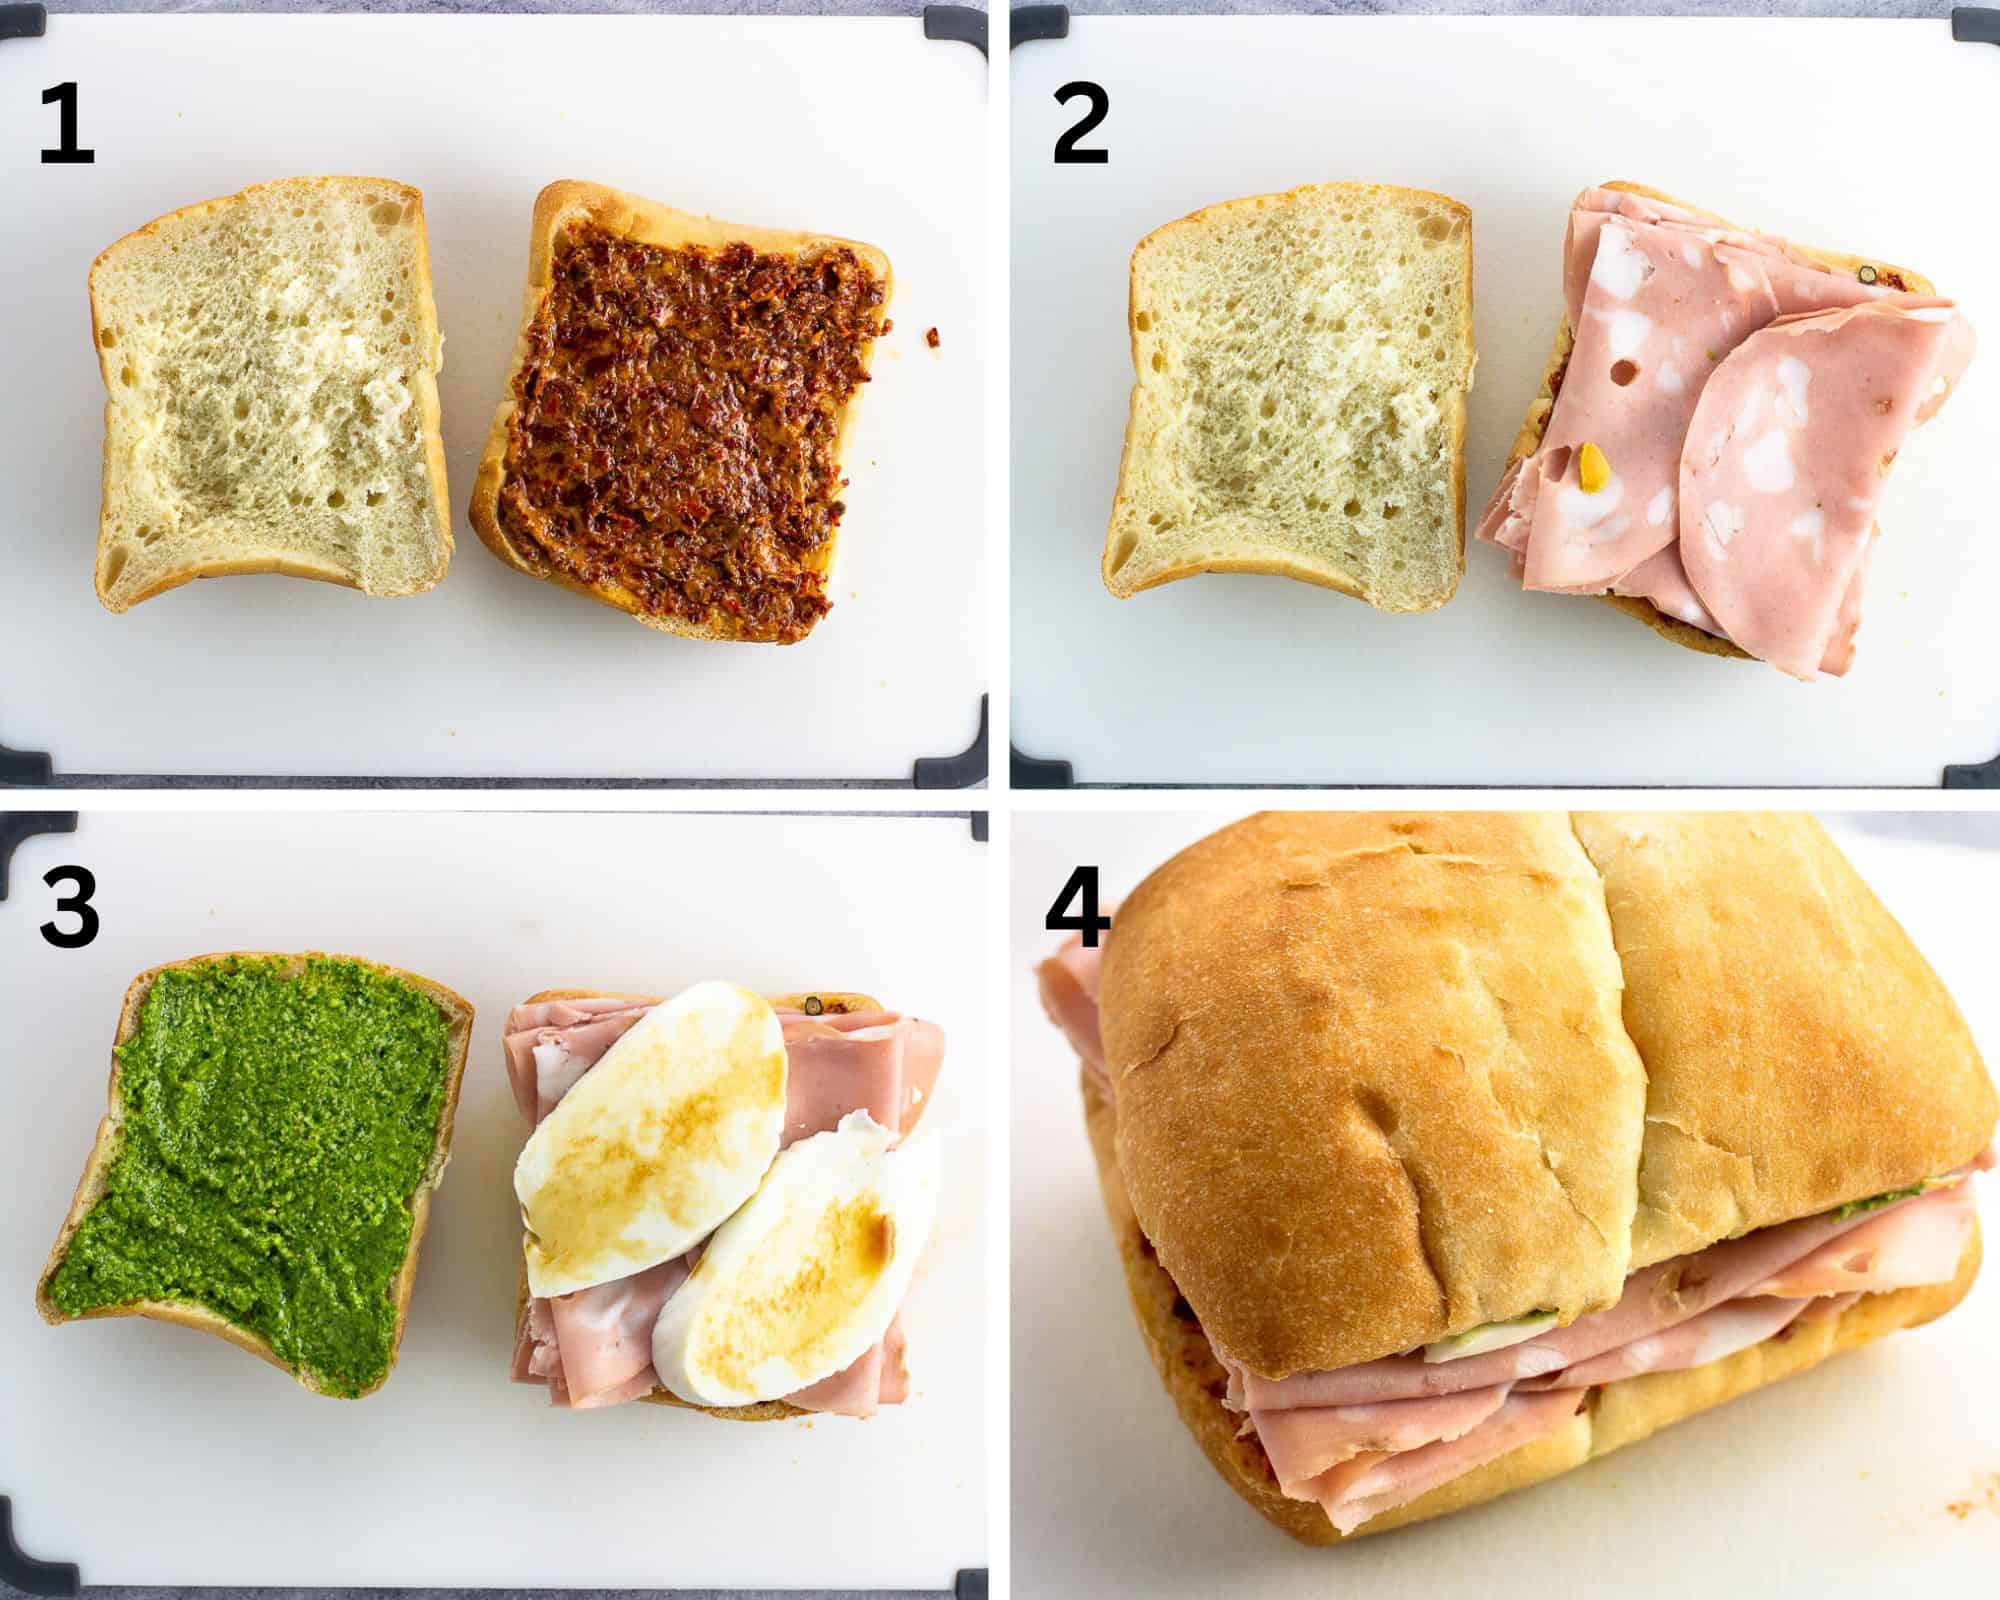 The stages of layering a mortadella panini.